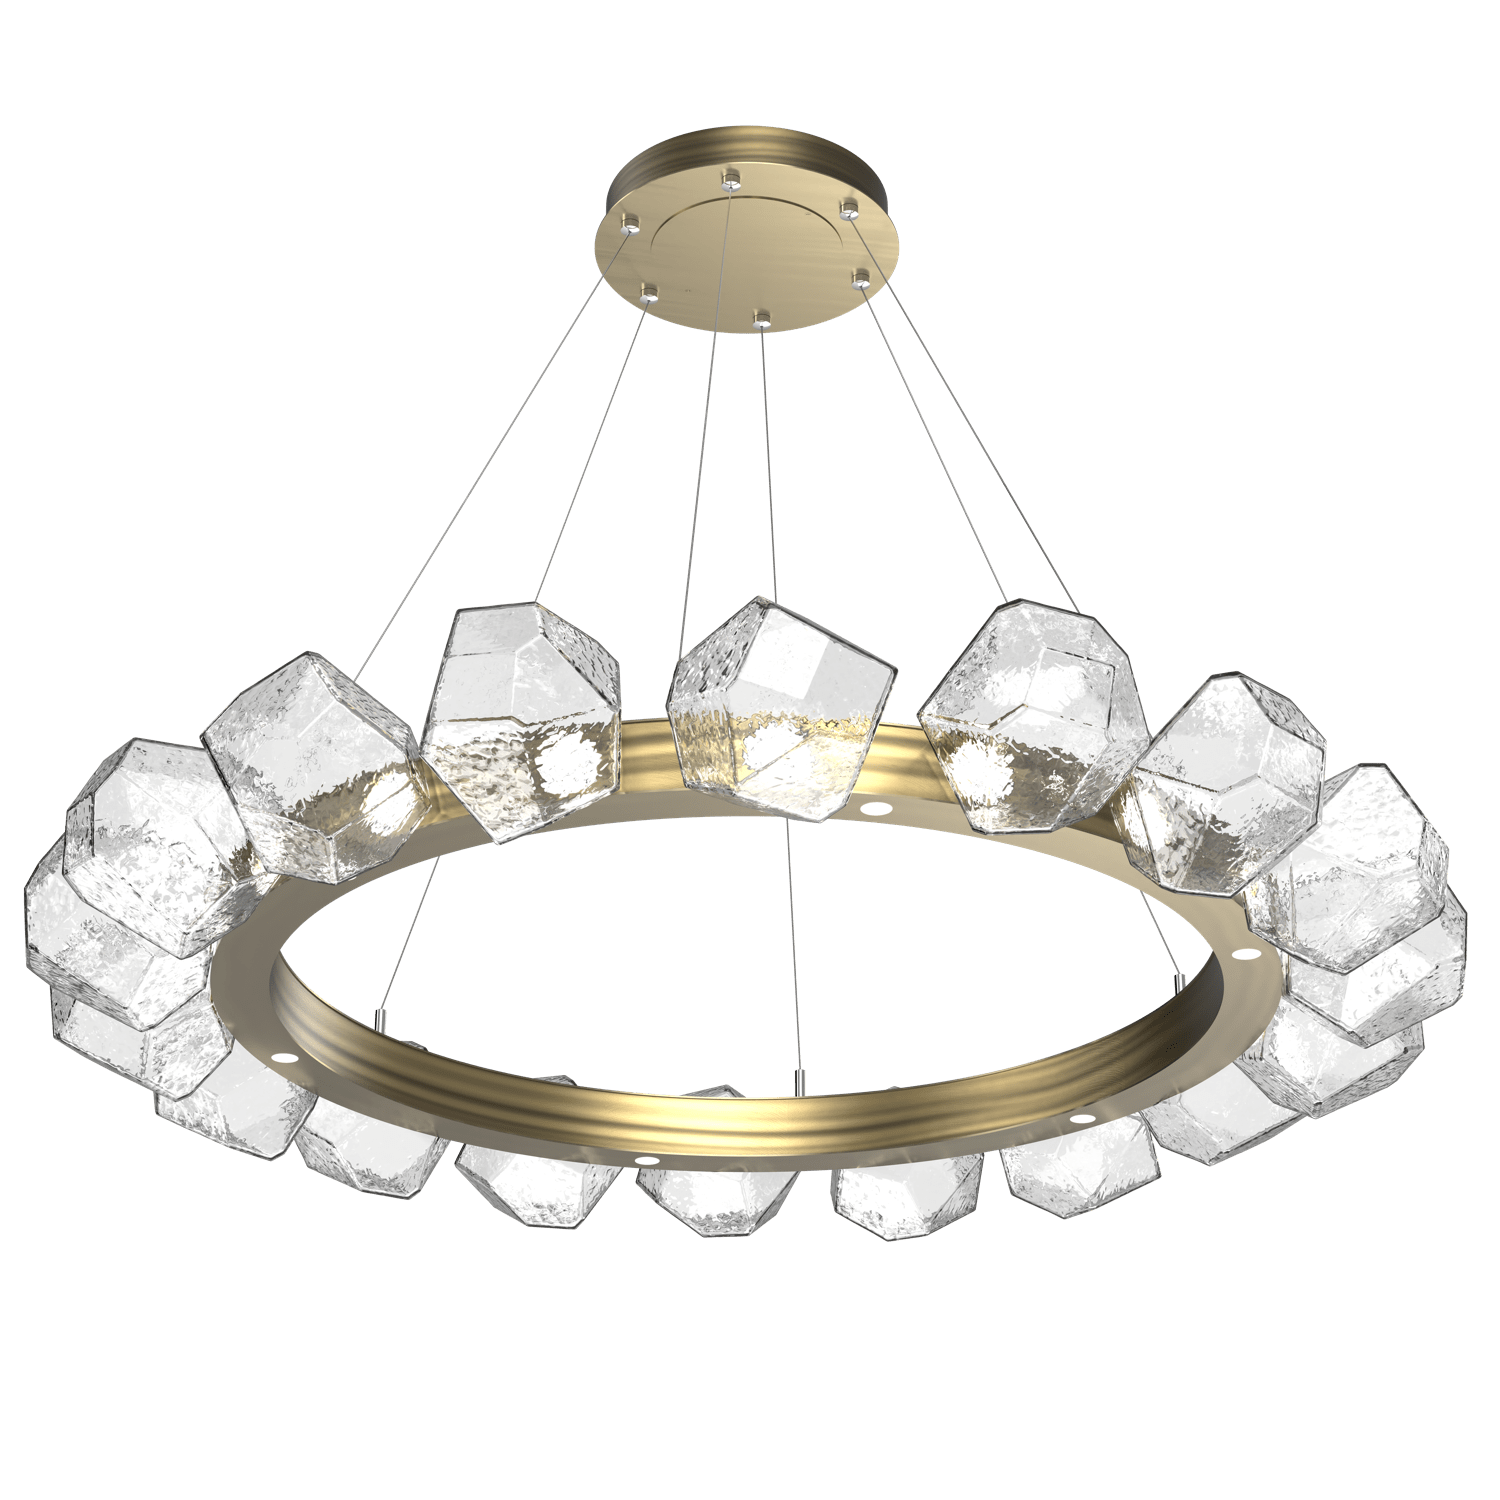 CHB0039-48-HB-C-Hammerton-Studio-Gem-48-inch-radial-ring-chandelier-with-heritage-brass-finish-and-clear-blown-glass-shades-and-LED-lamping